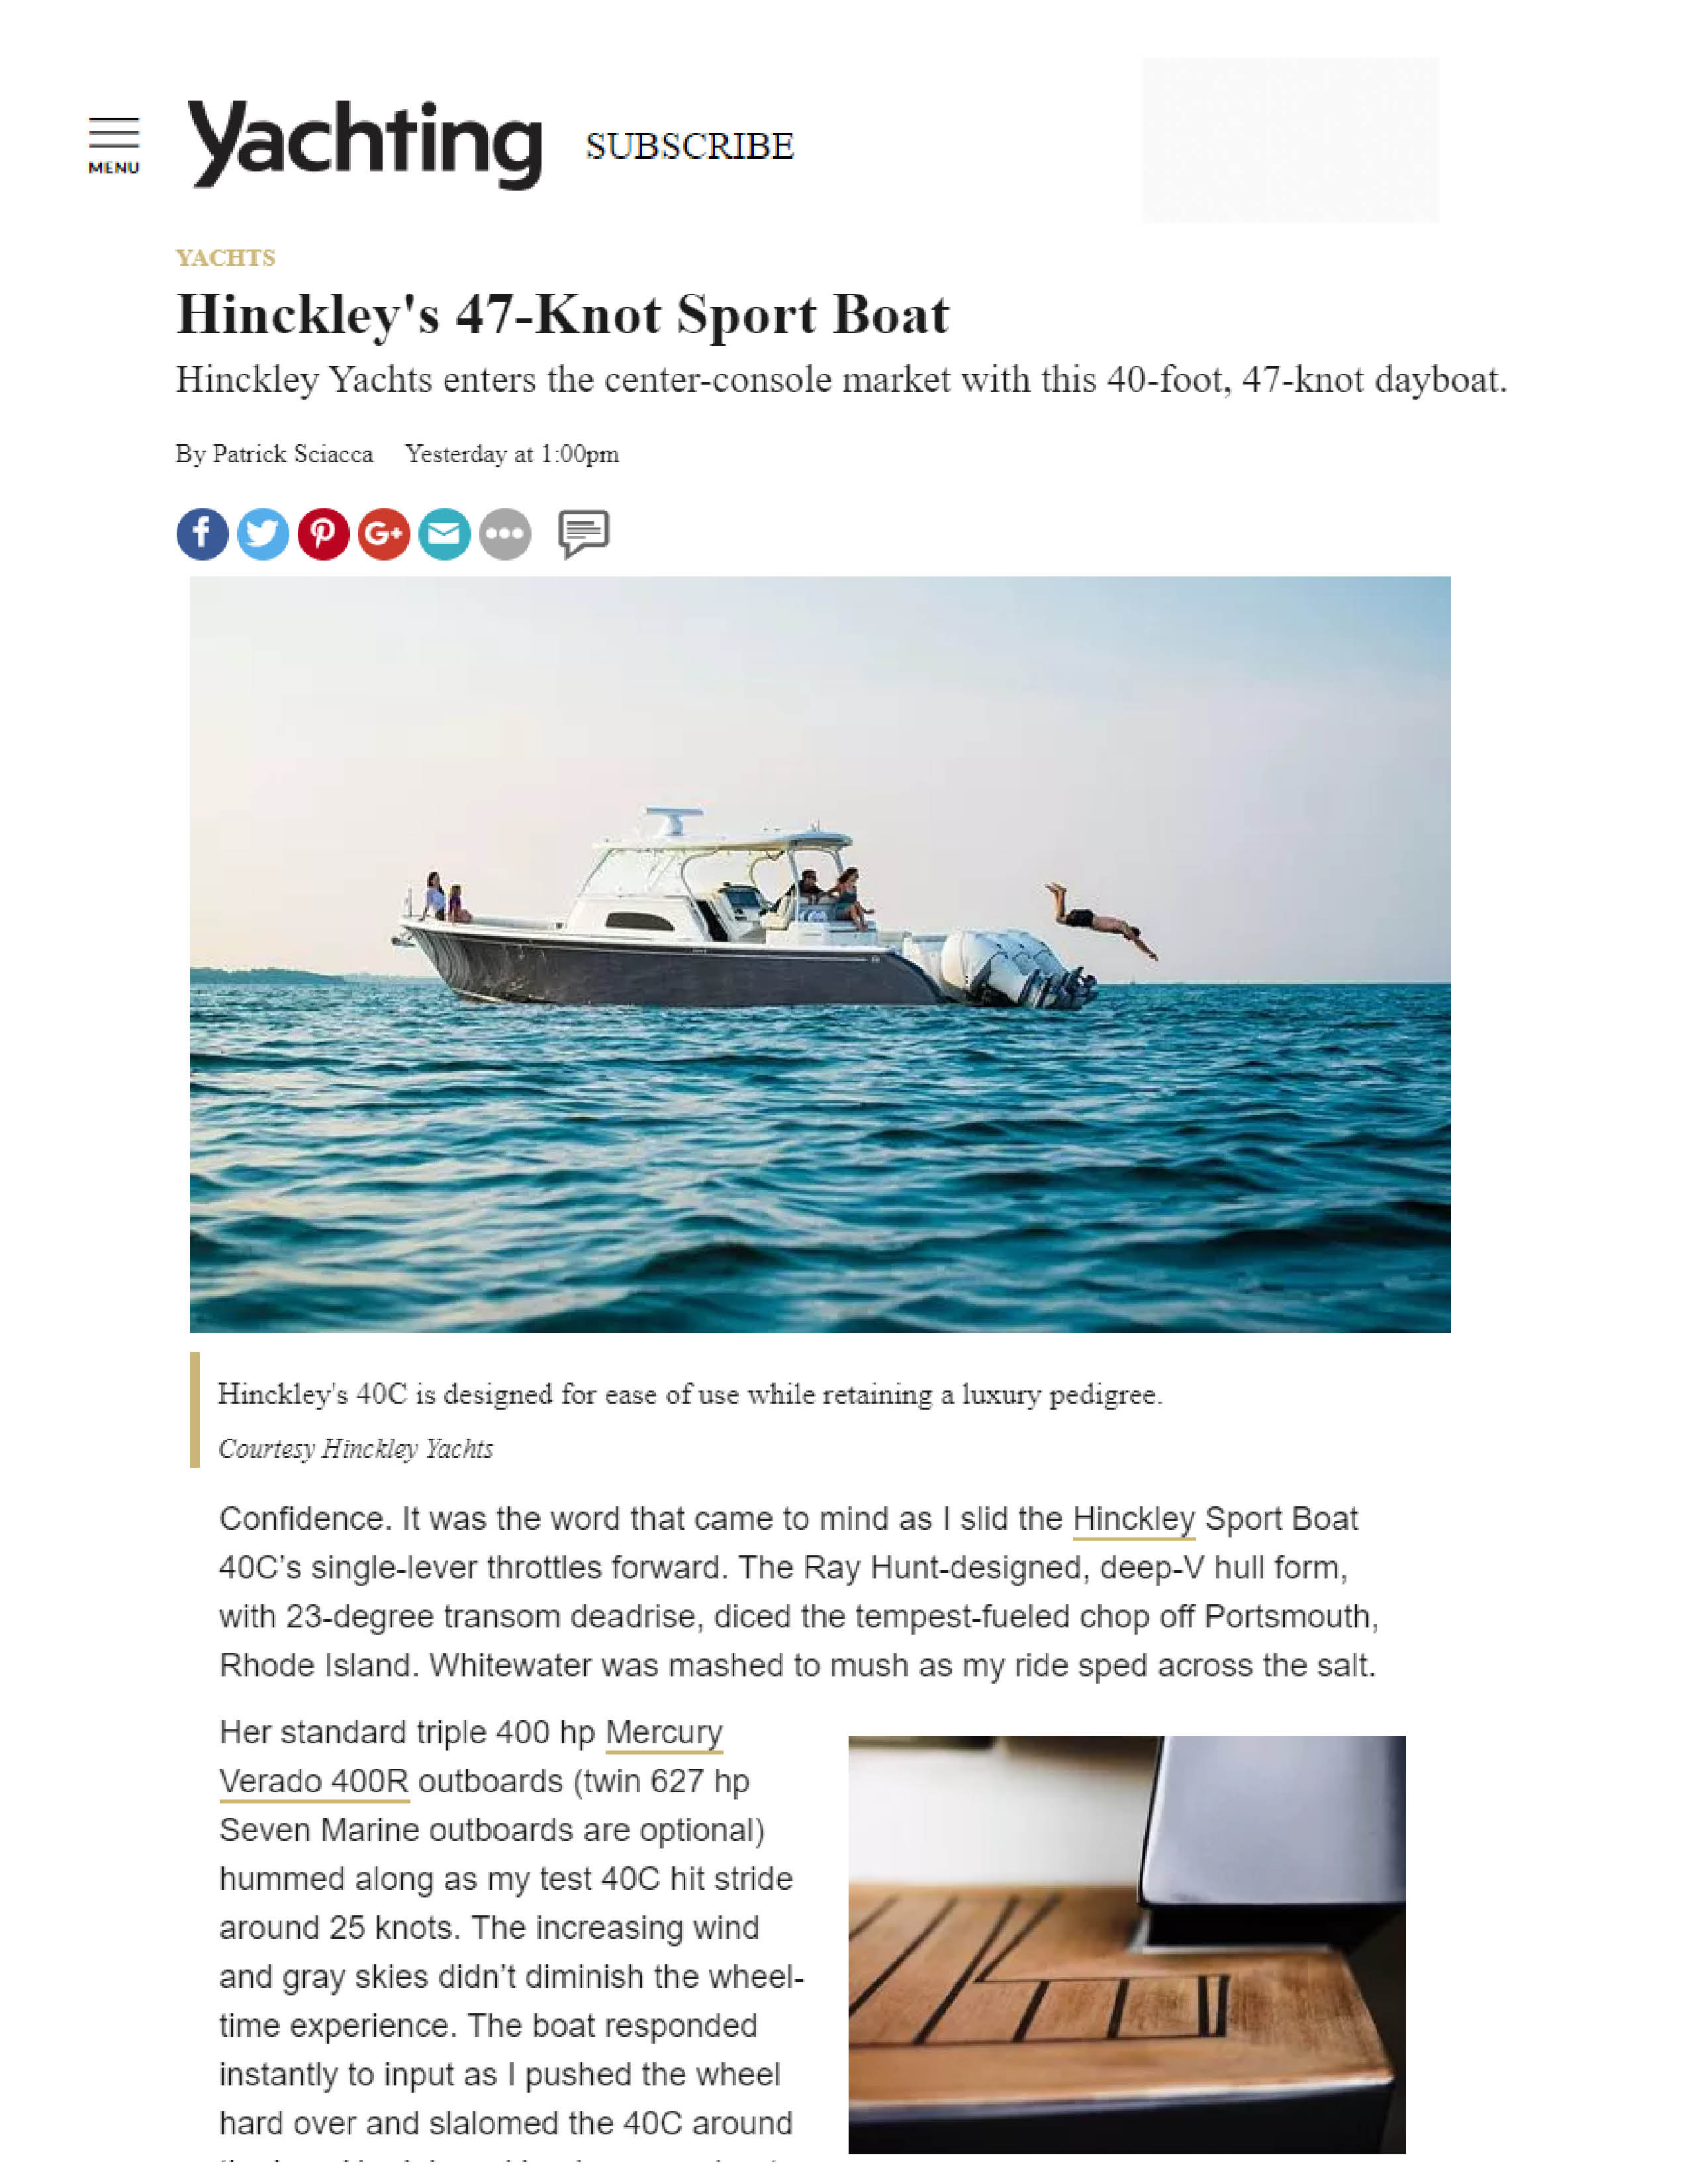 Hinckley Sport Boats Featured in Yachting